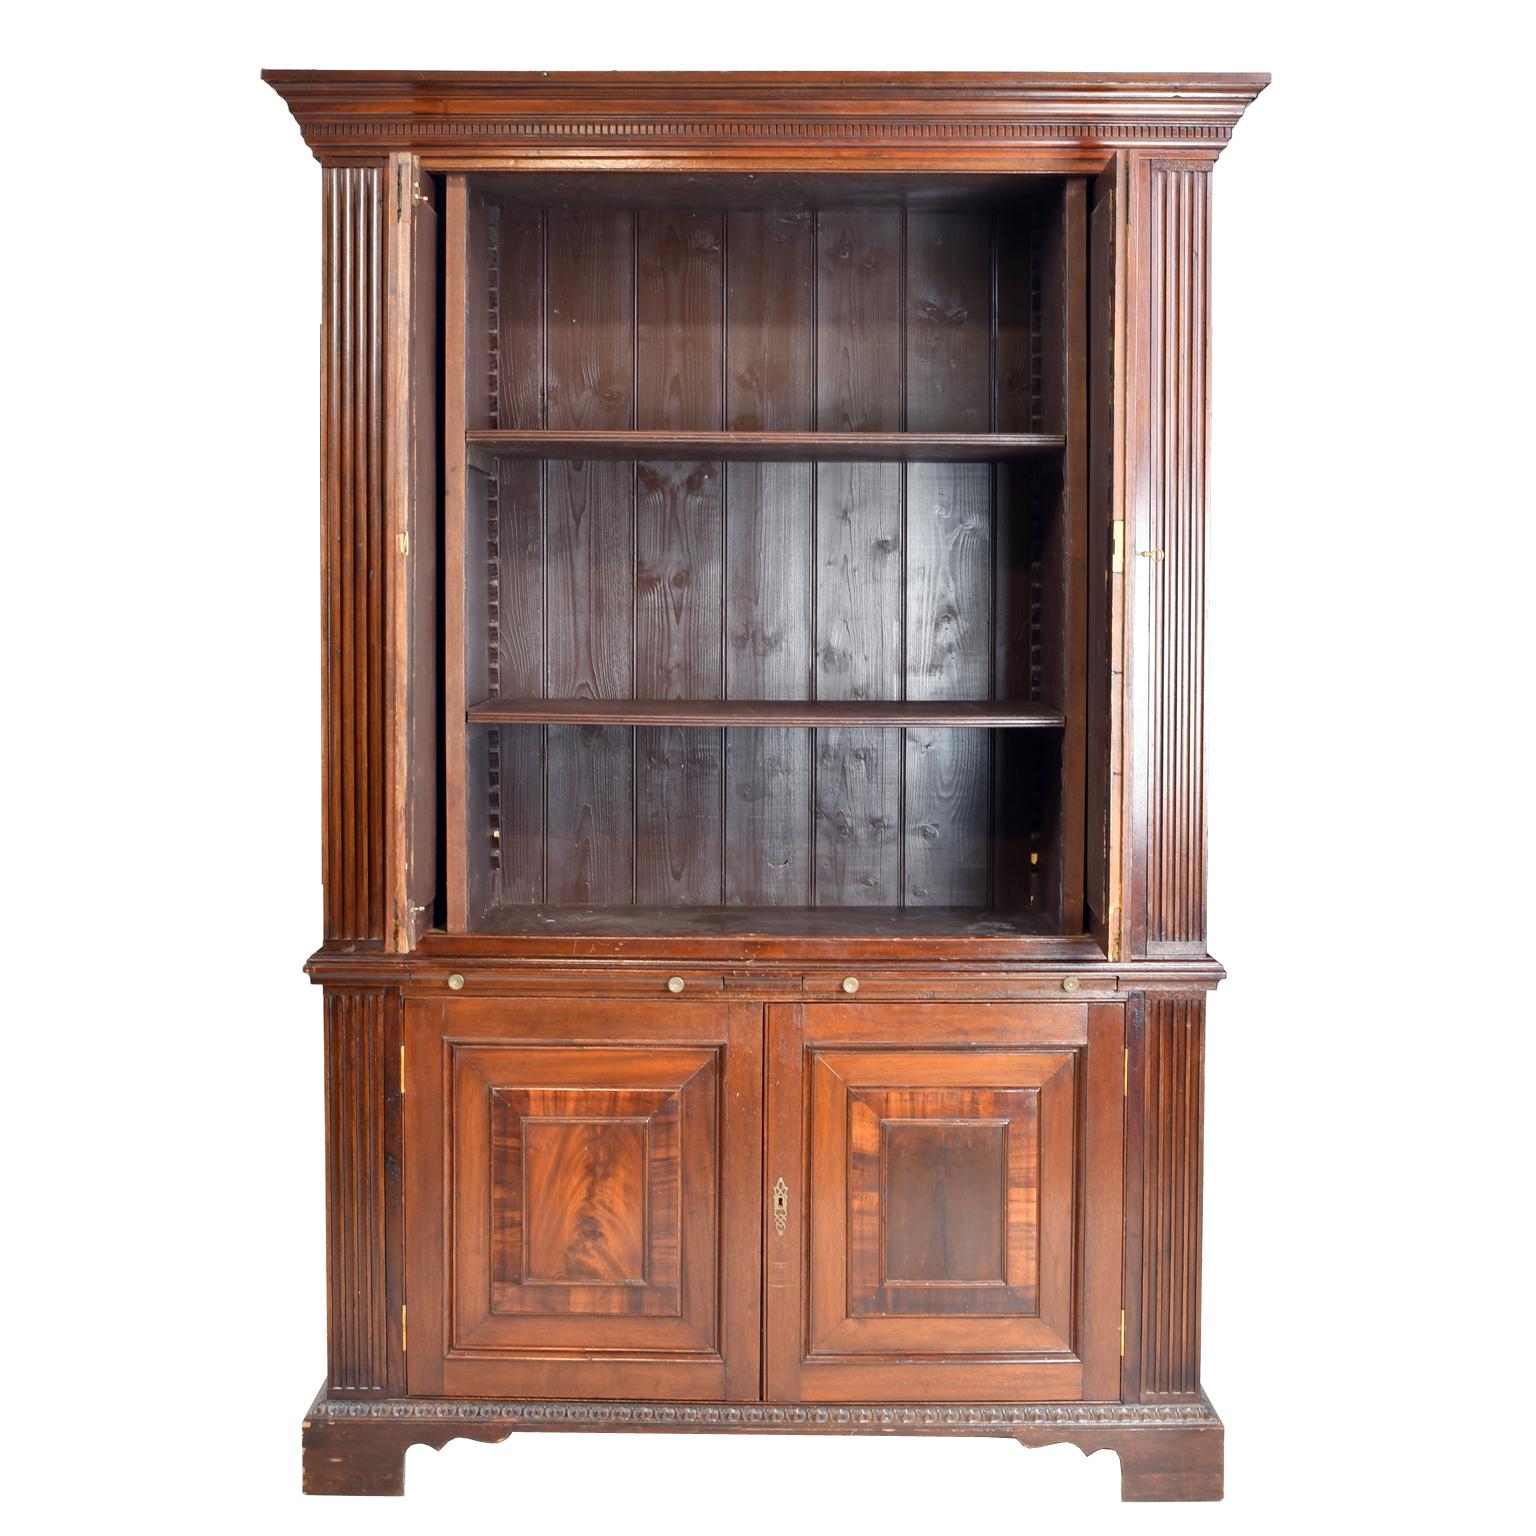 Decorative assembled cabinet features faux bookcase doors with iron grating that pocket in. Doors are flanked by flat fluted pilasters. Unit sits on bracket feet, lower doors have raised panels bordered with crossbanded mahogany veneer and crotch